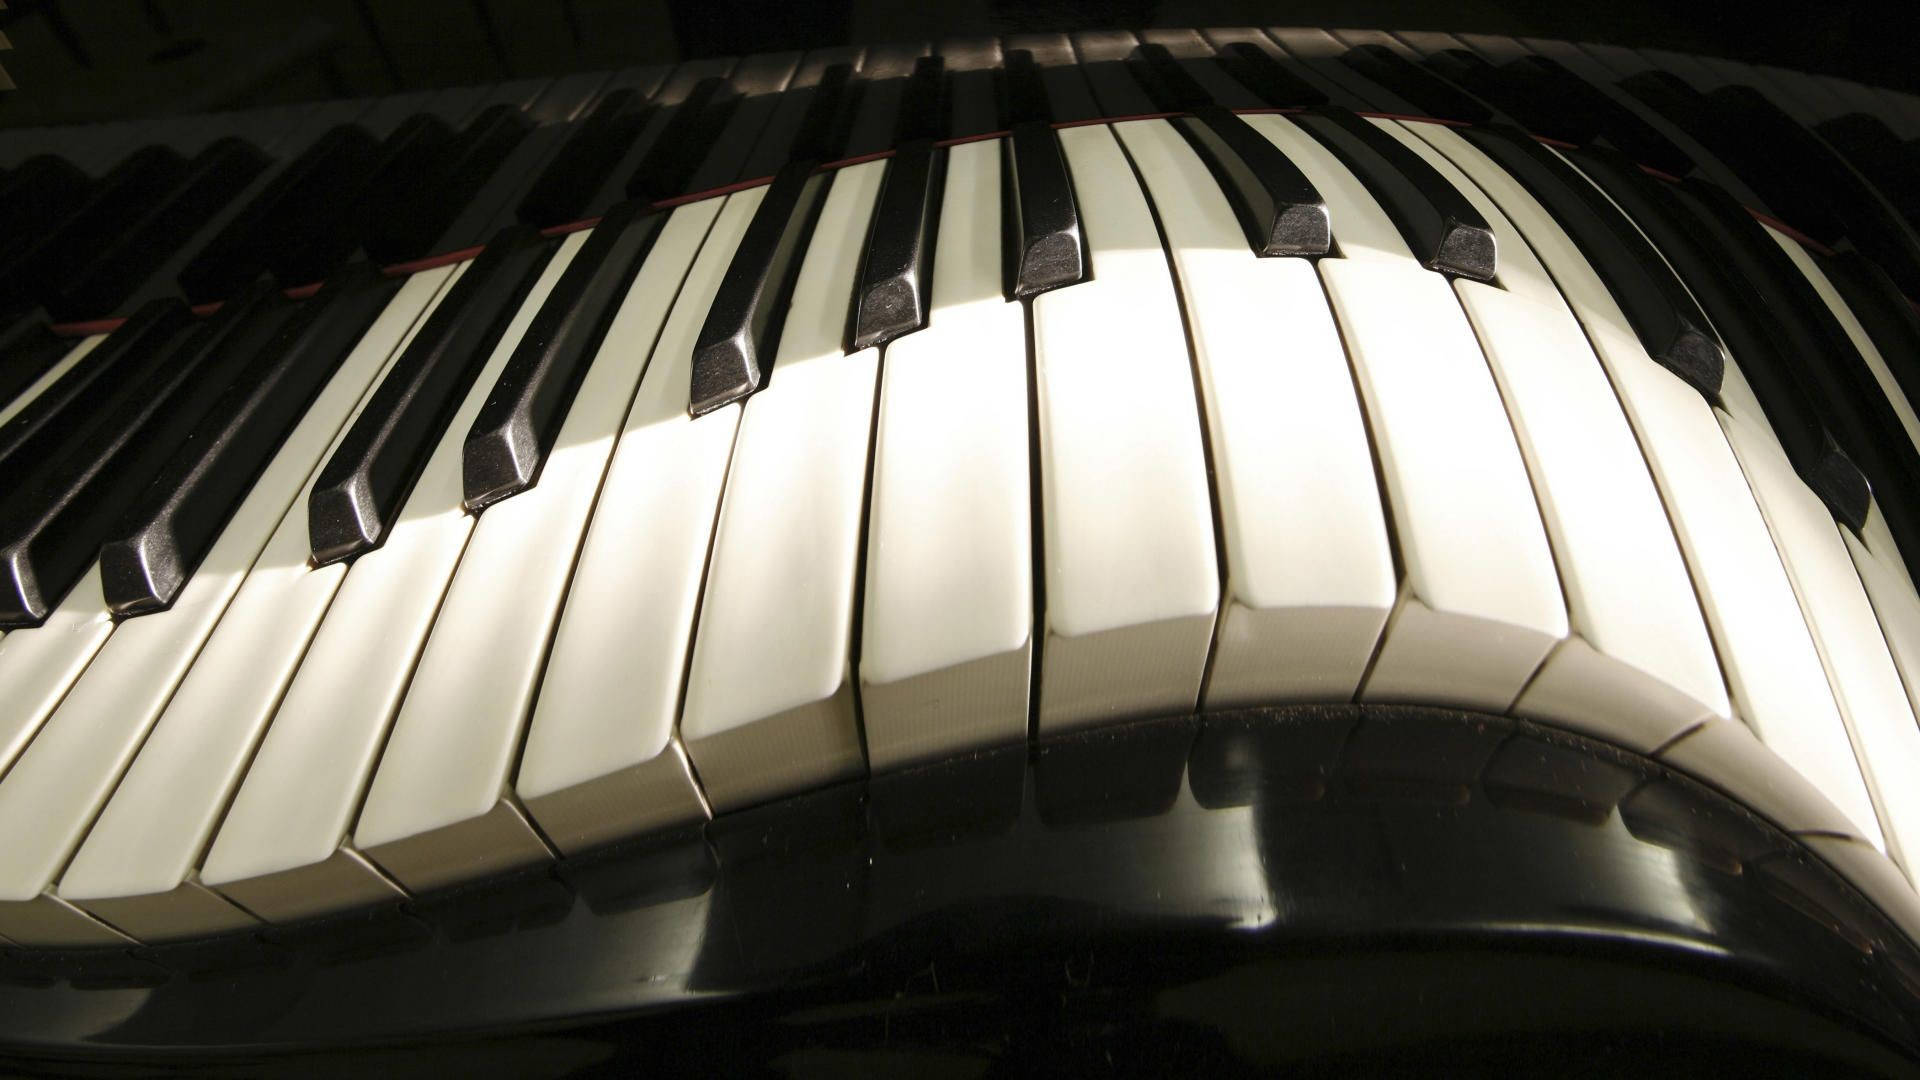 Distorted Piano Photoshop Hd Background